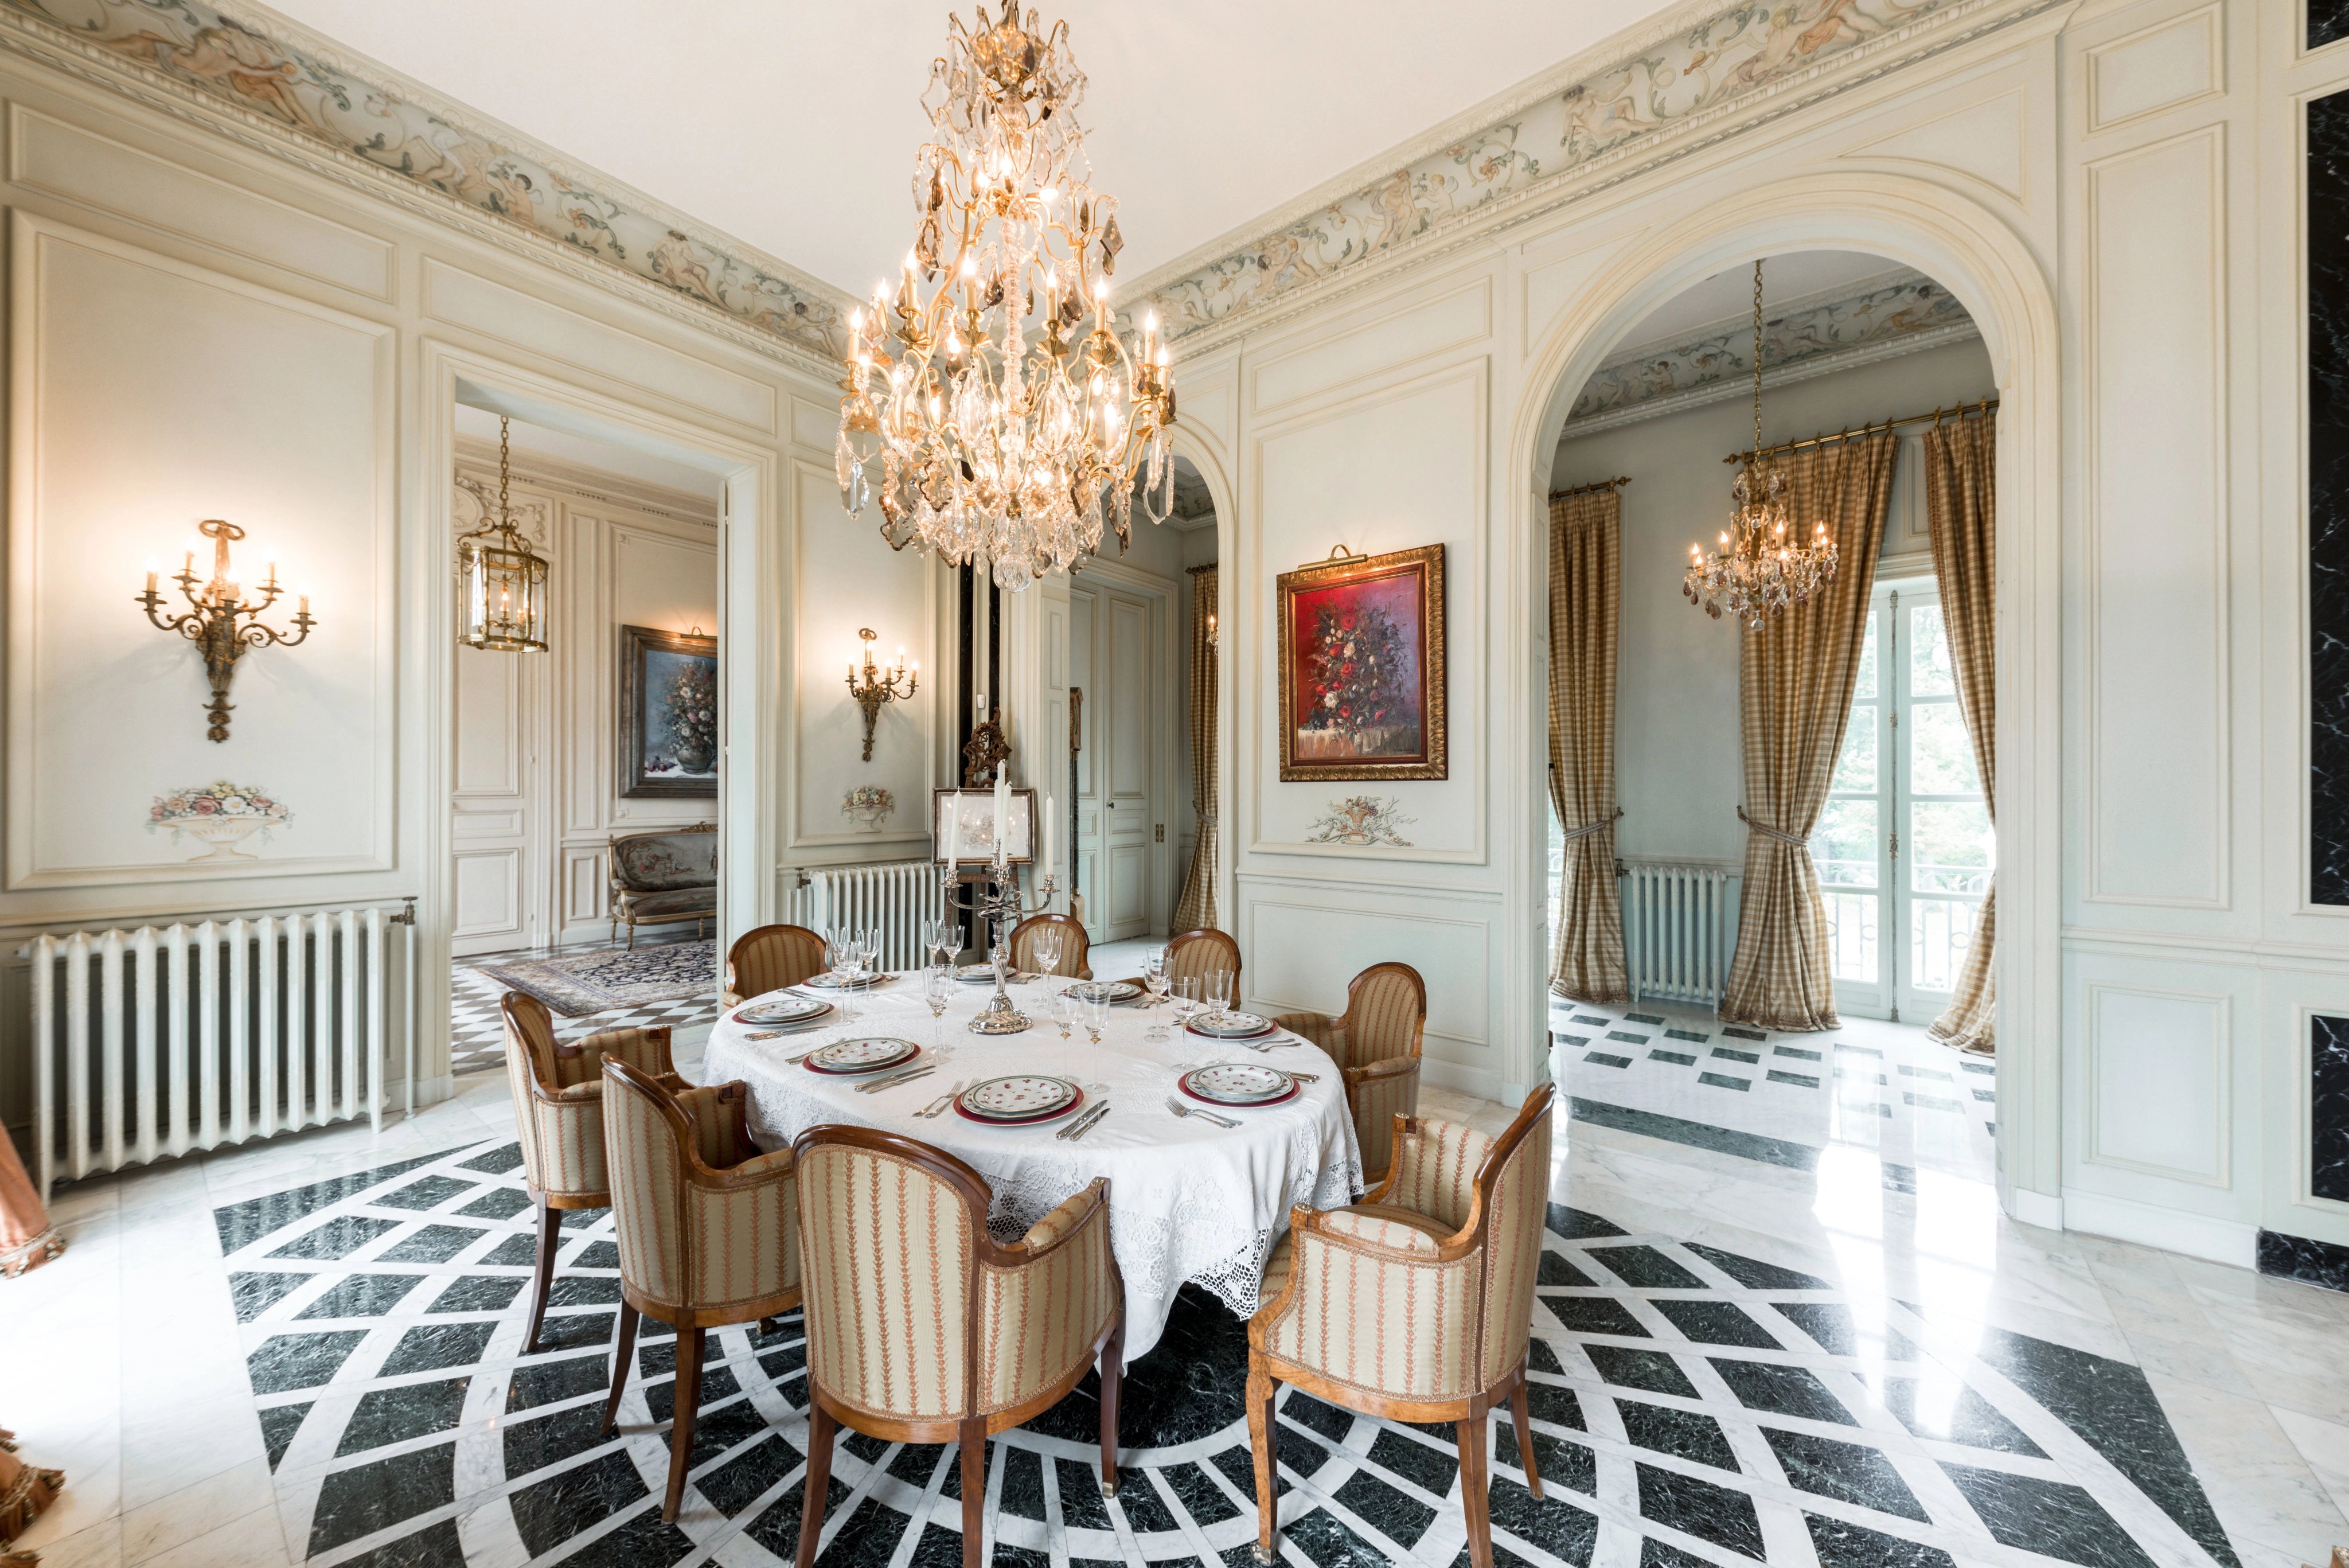 A sublime Palais inspired by Grand Trianon Palace, 20 min from Paris_1485